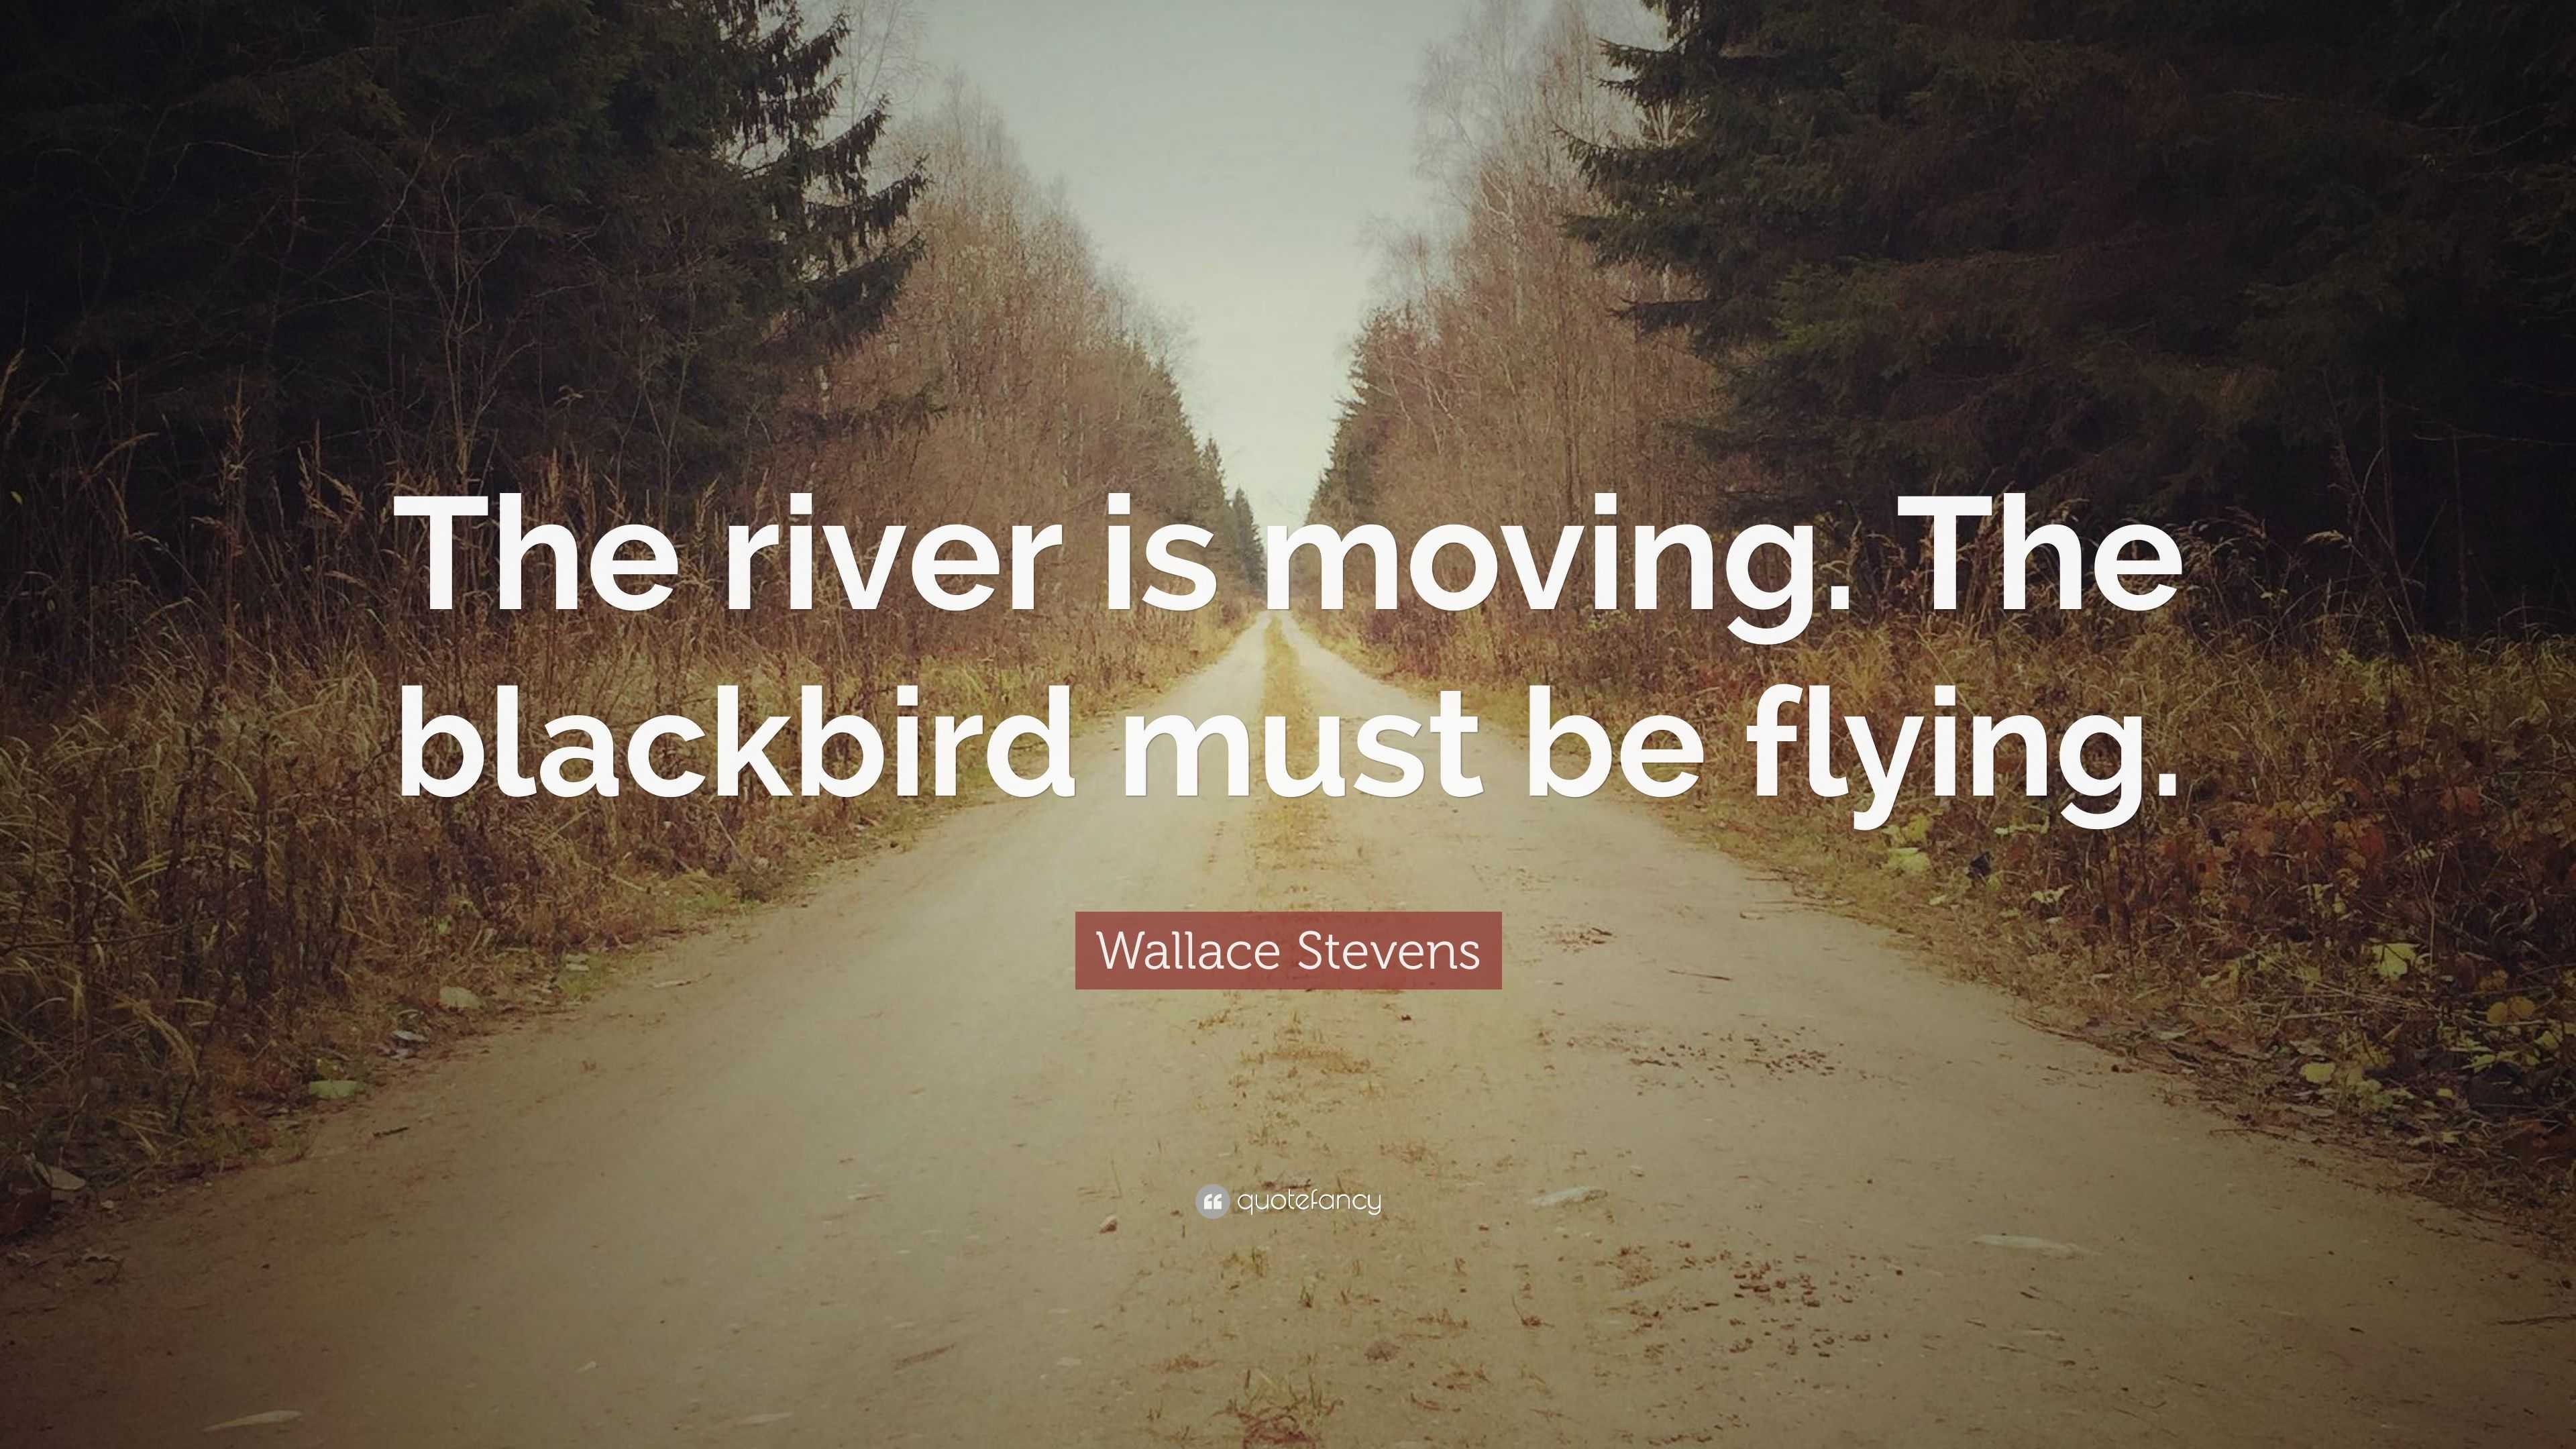 Wallace Stevens Quote: “The river is moving. The blackbird must be flying.”